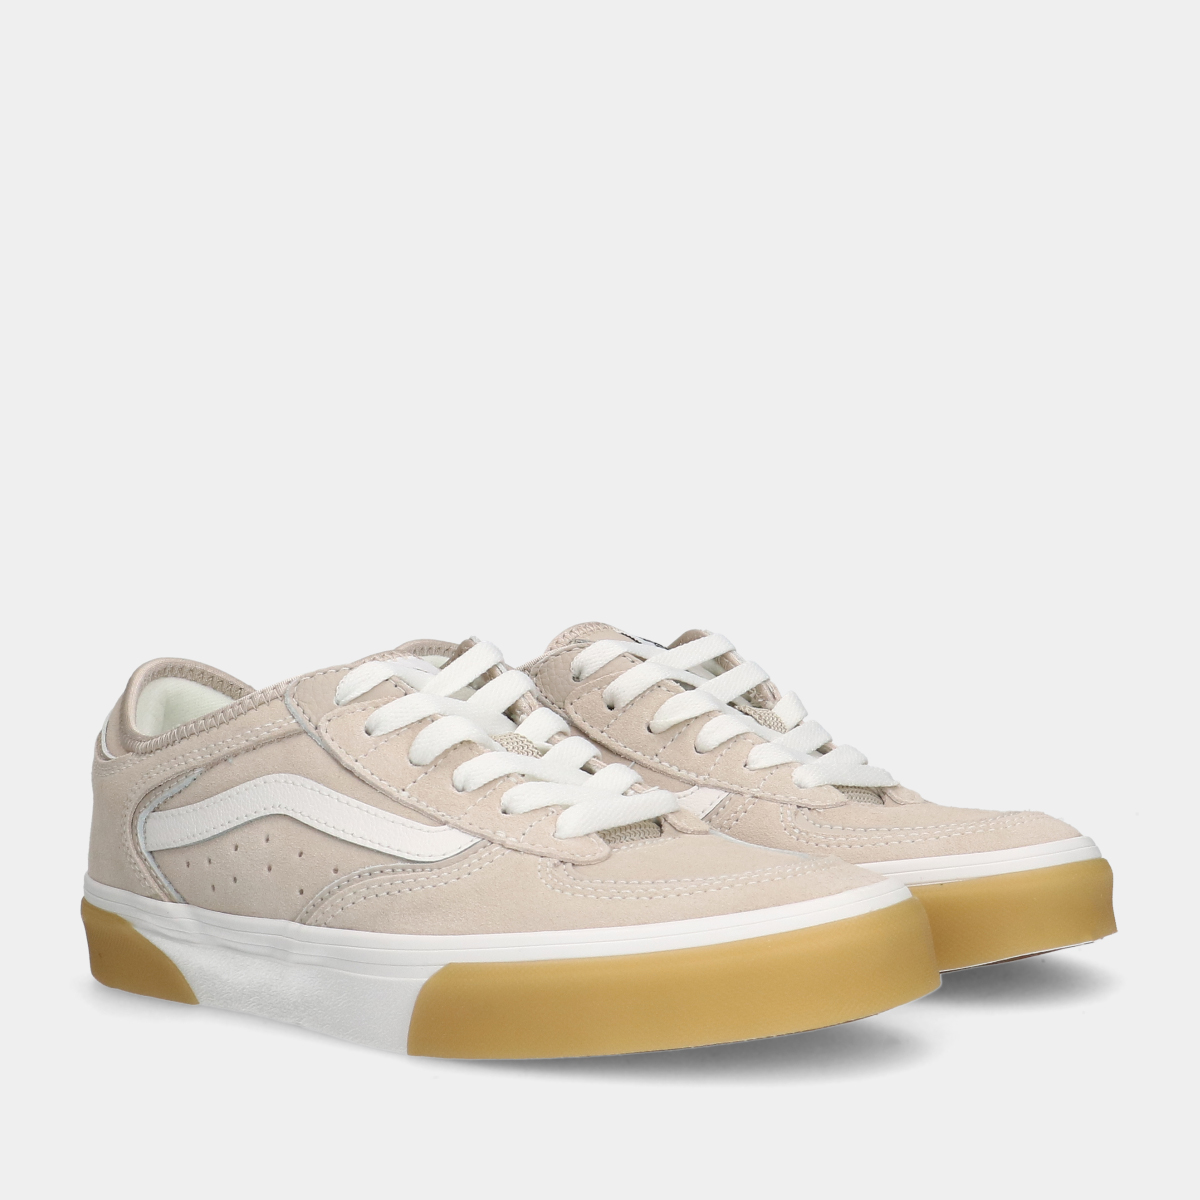 Vans Rowley Classic Muted clay/ gum sneakers